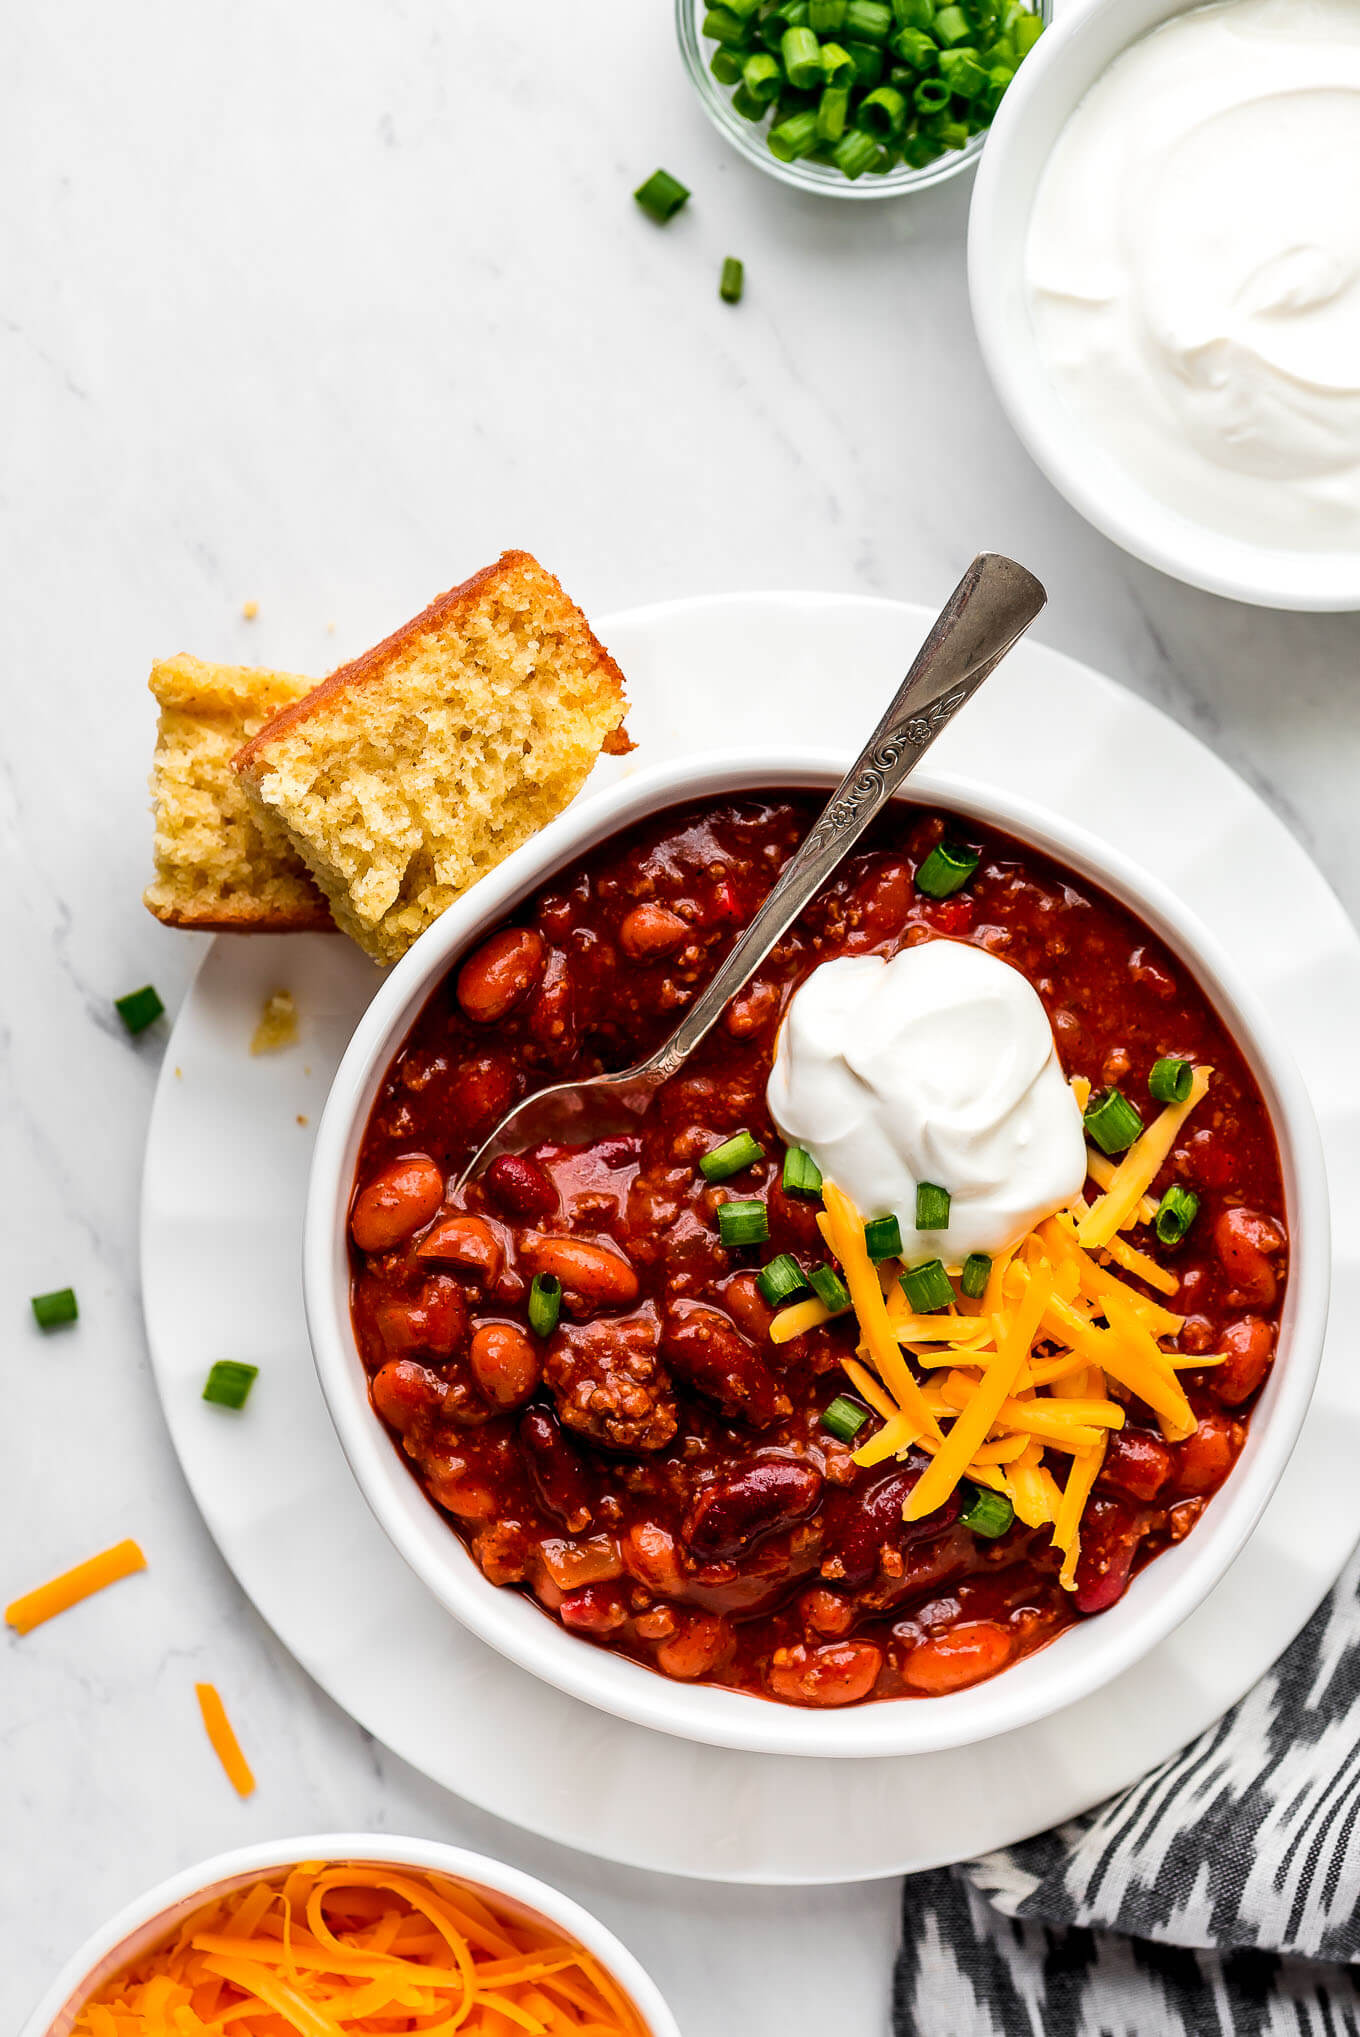 Instant Pot Chili in a bowl on a plate and topped with cheddar cheese, sour cream, and green onions. Corn bread and bowls of toppings to the side.